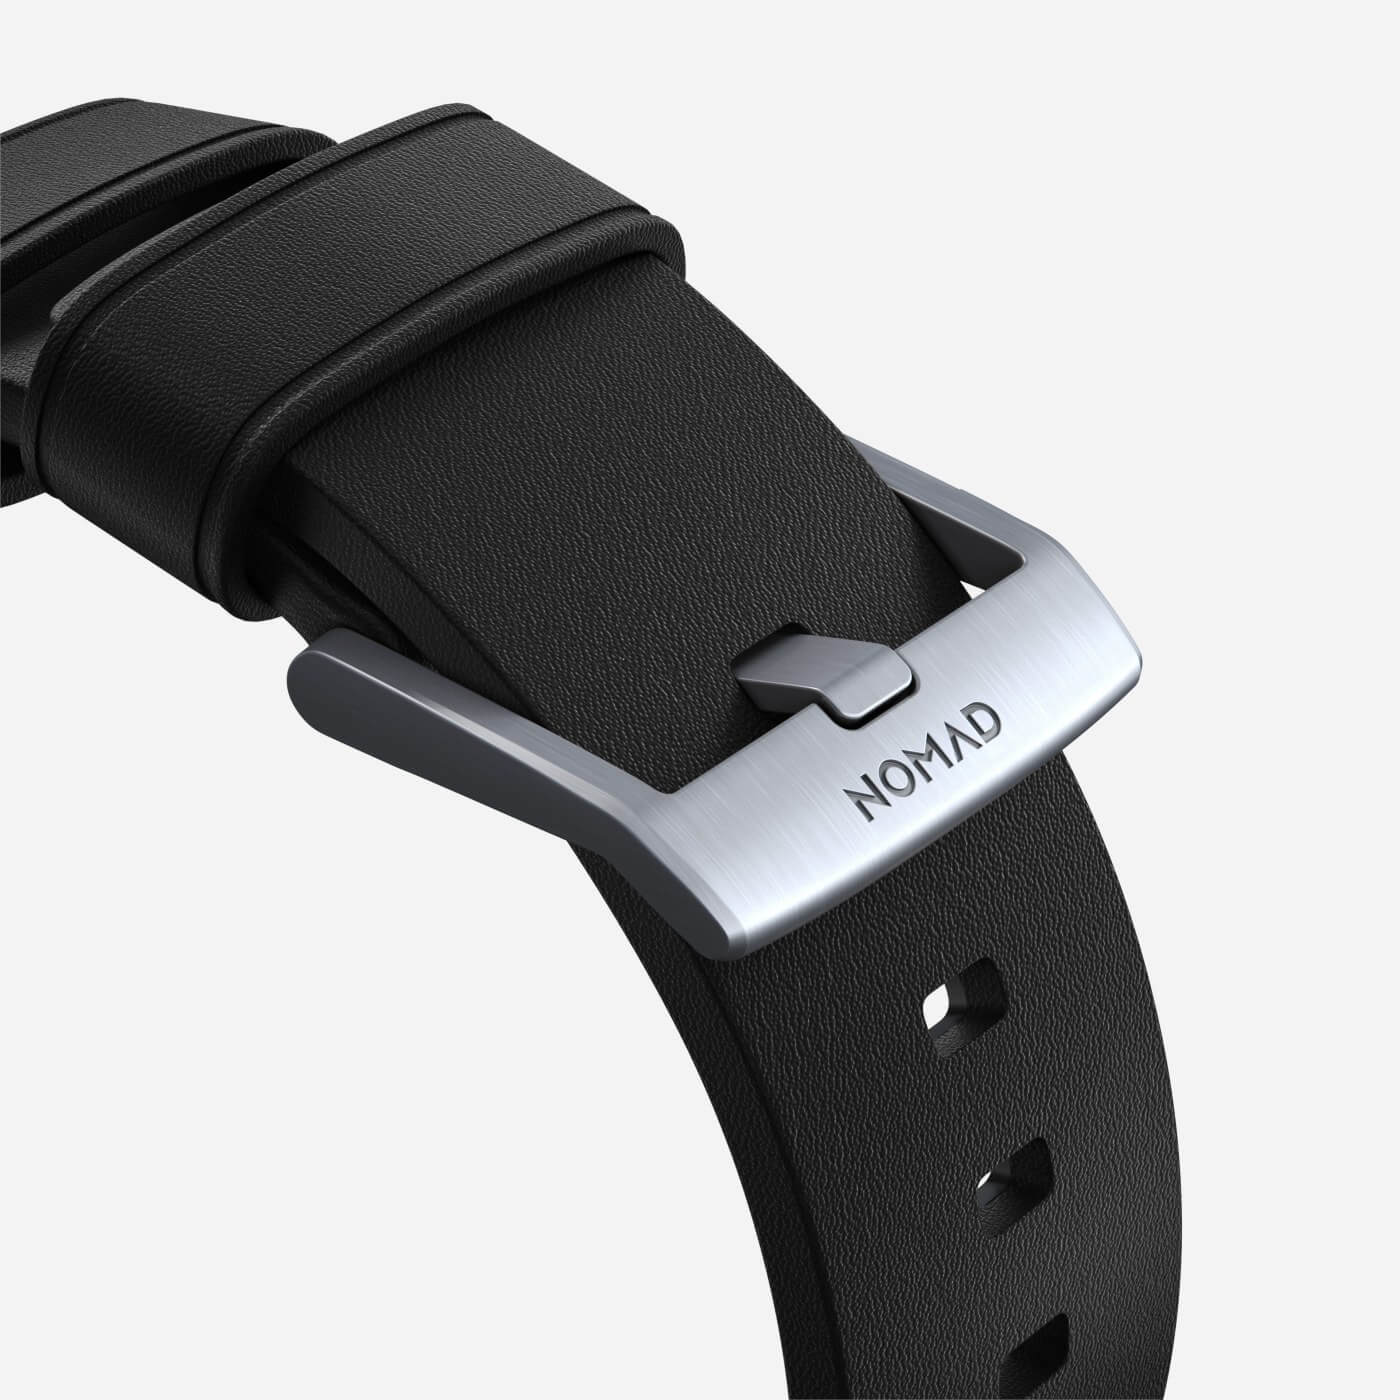 Nomad launches new aluminum Apple Watch bands | AppleInsider